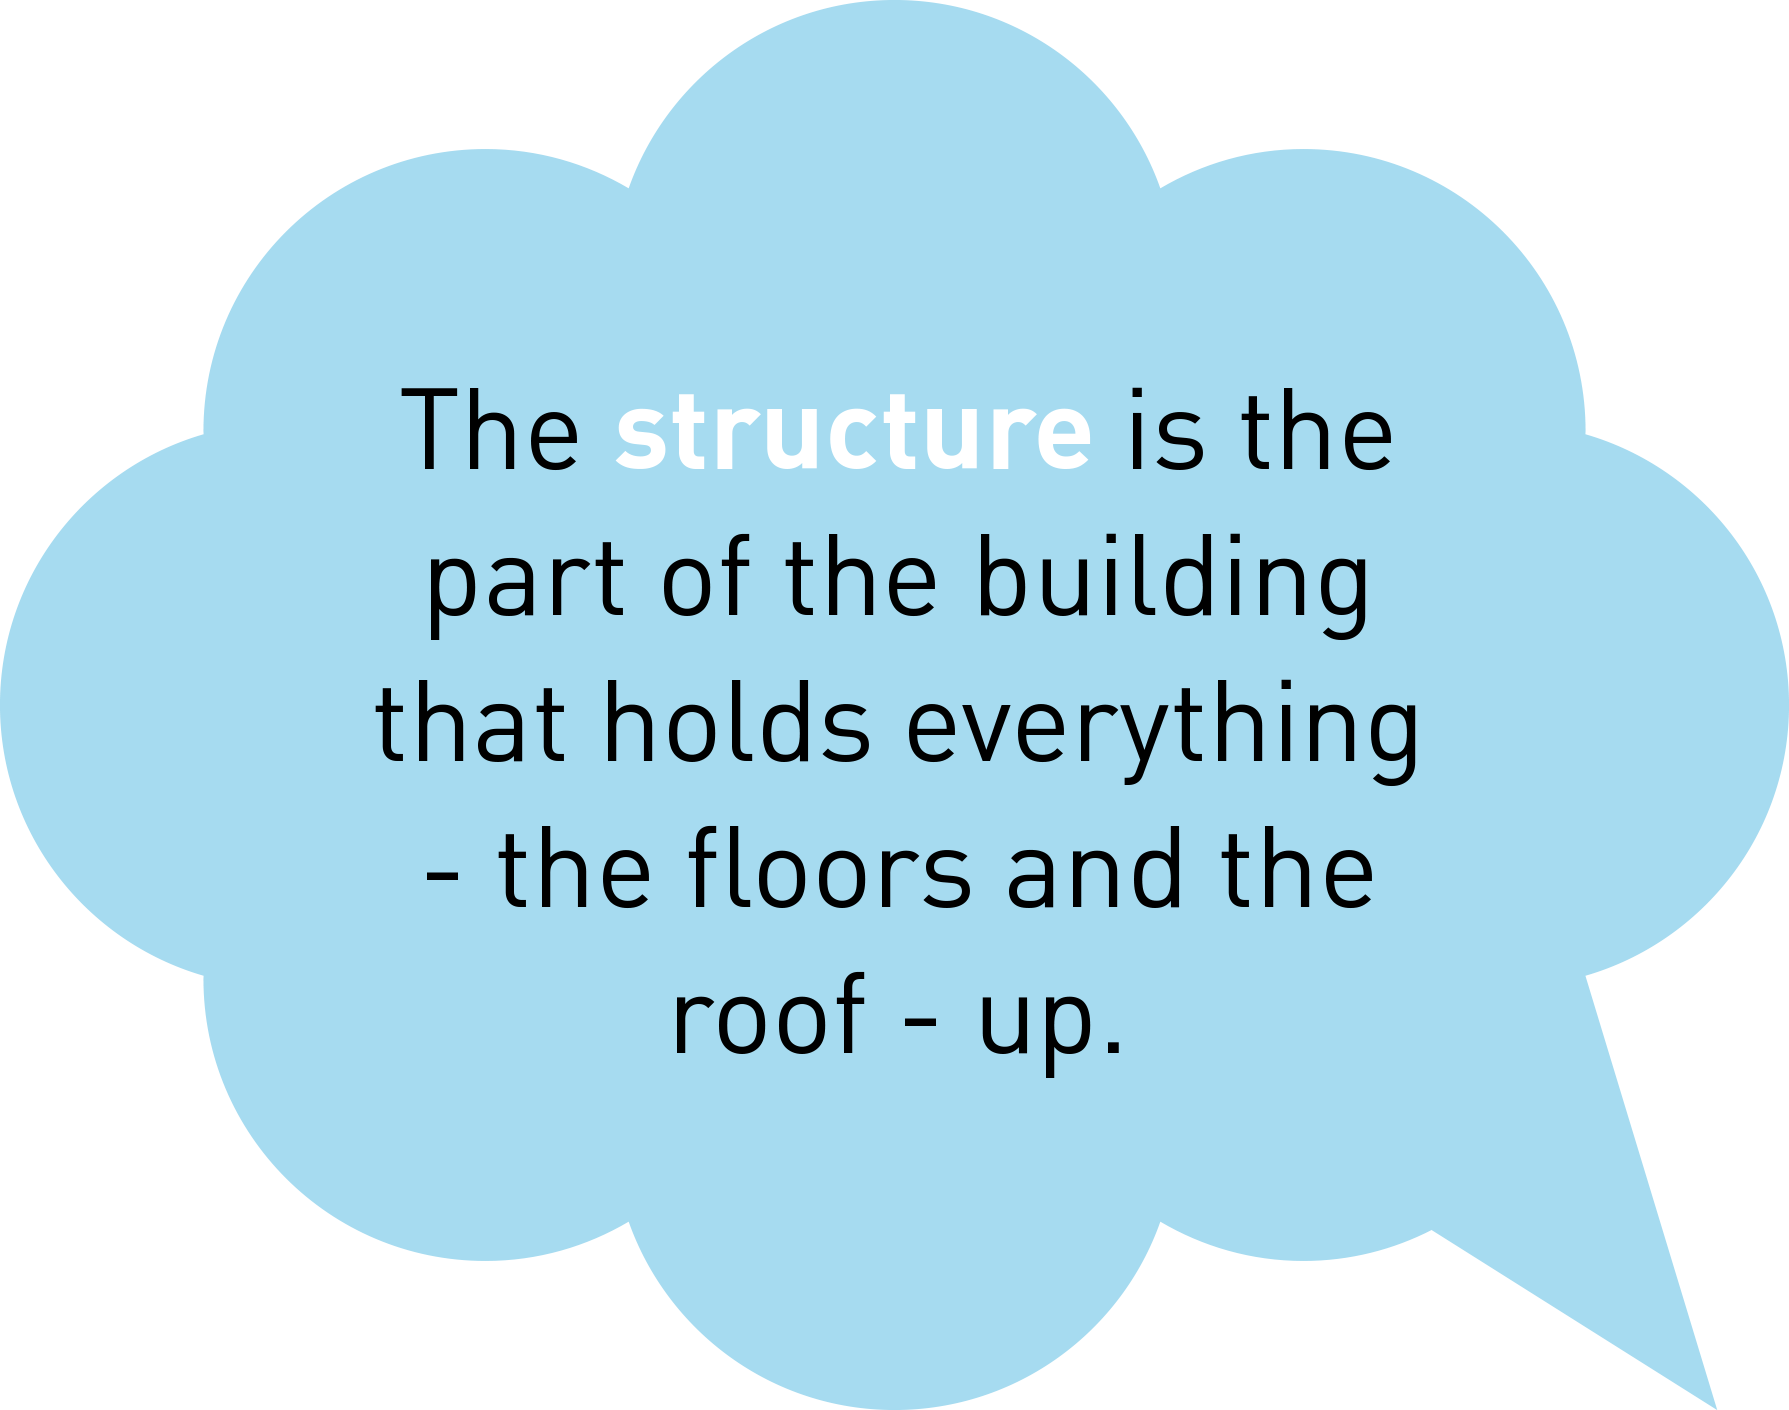 The structure is the part of the building that holds everything - the floors and the roof - up.